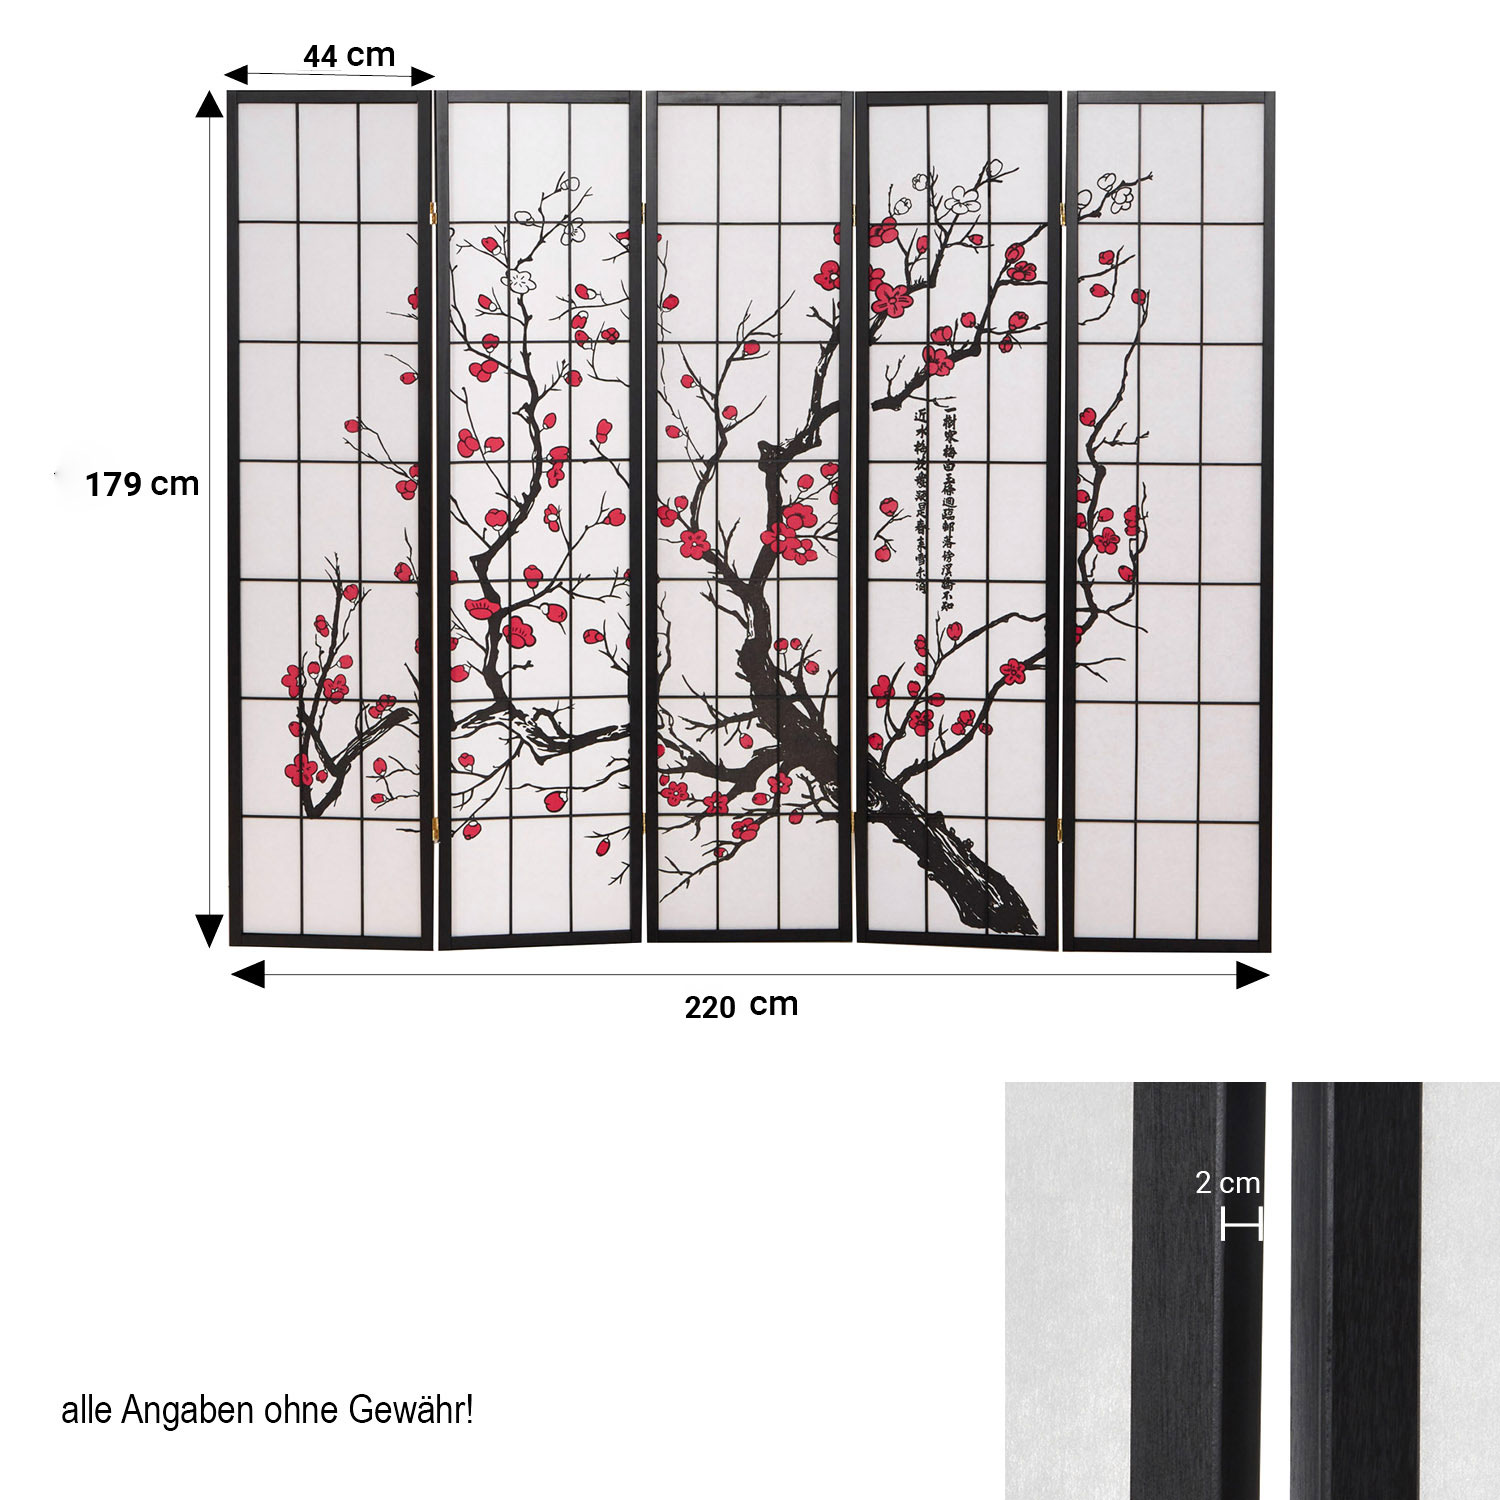 Screen room divider, 5 parts, wood black, rice paper white, cherry pattern, height 179 cm